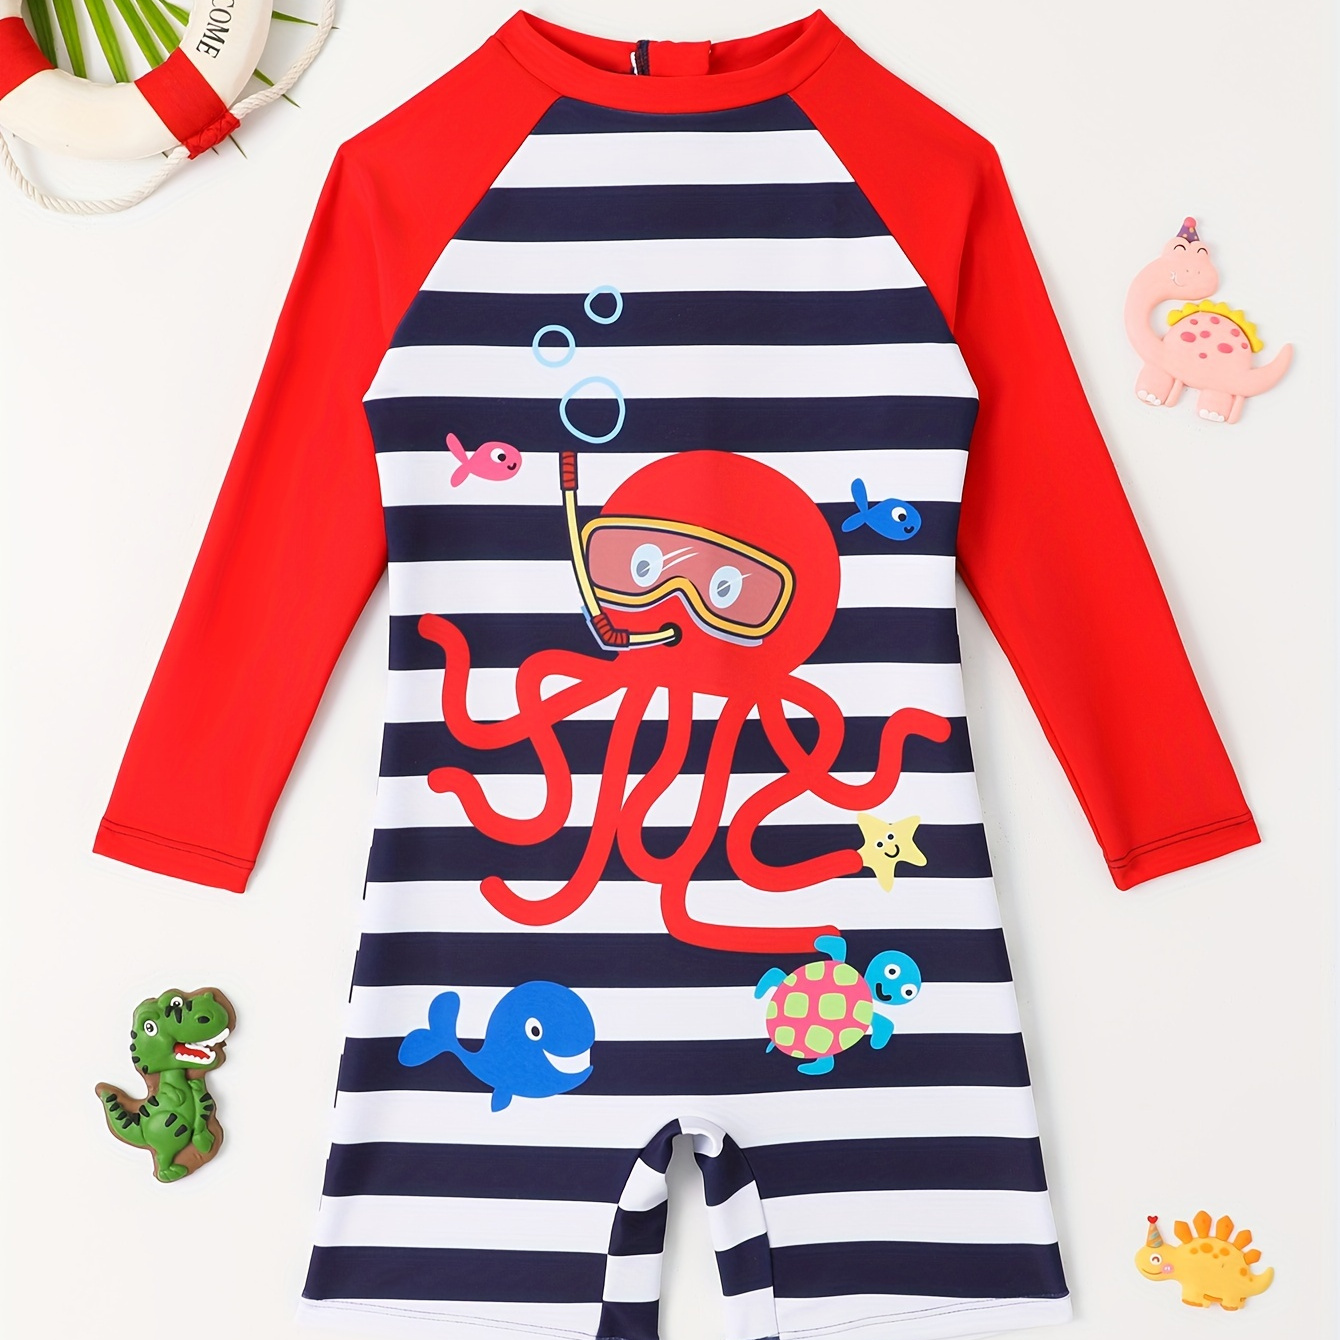 

Baby Boys One-piece Rash Guard Swimsuit, Cute Nautical Striped Swimwear With Cartoon Marine Animals, Sun Protection, Red And Blue With Zipper Closure For Toddlers